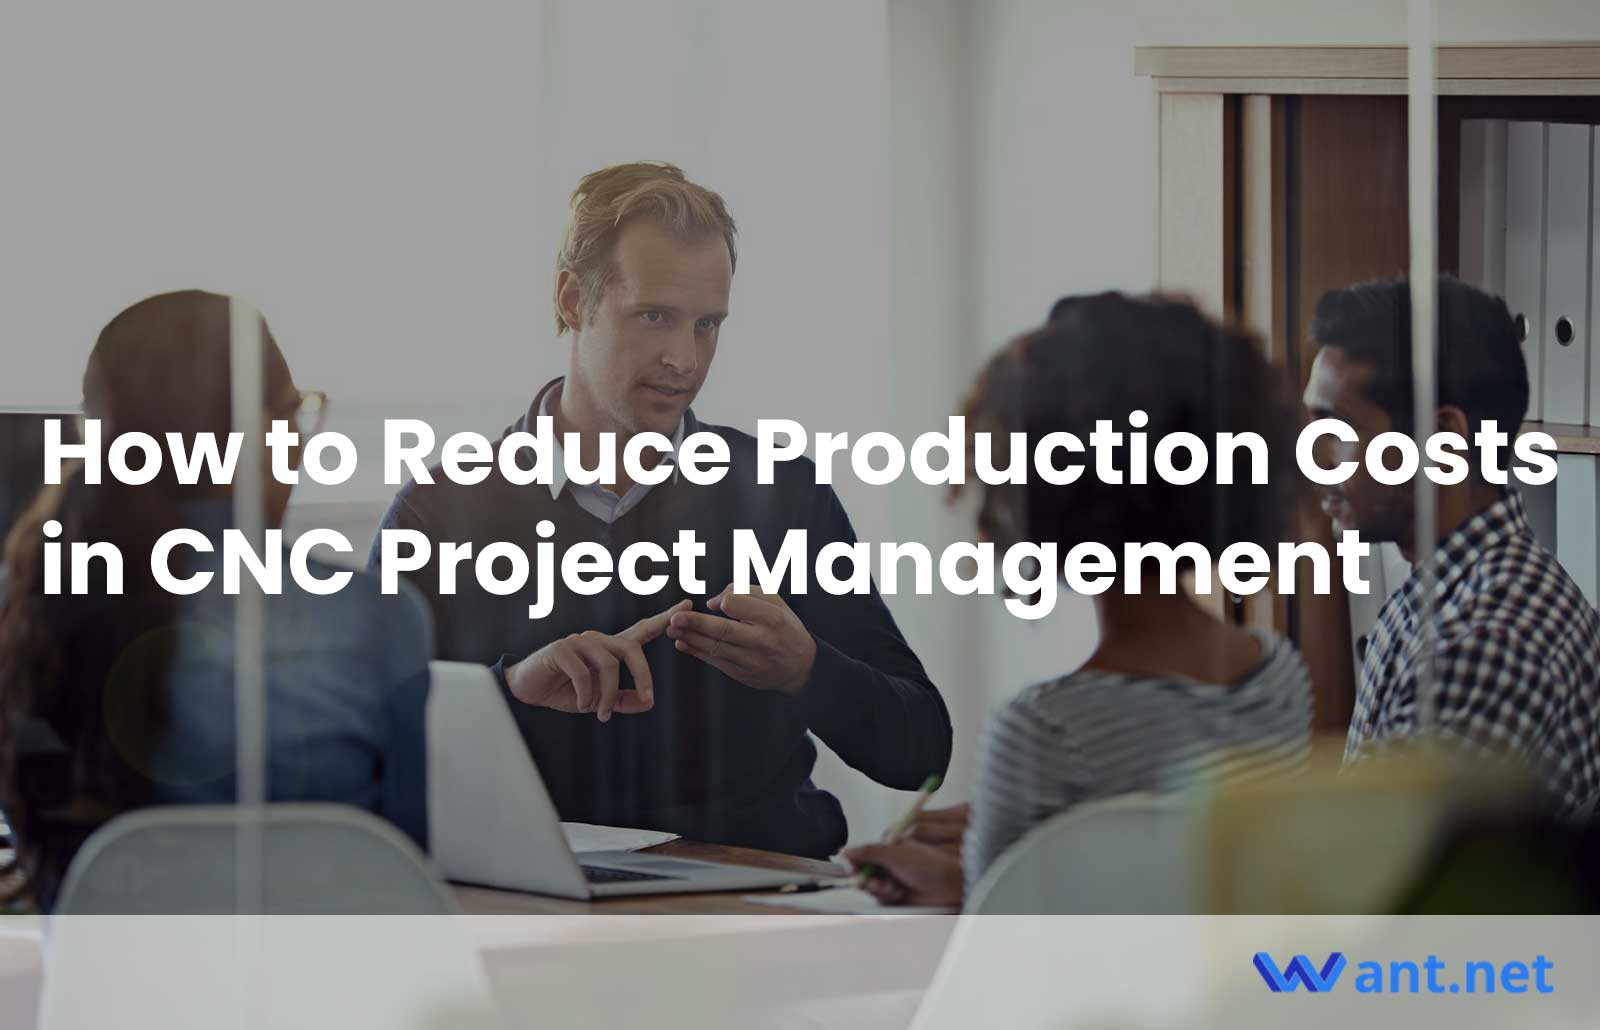 How to Reduce Production Costs in CNC Project Management